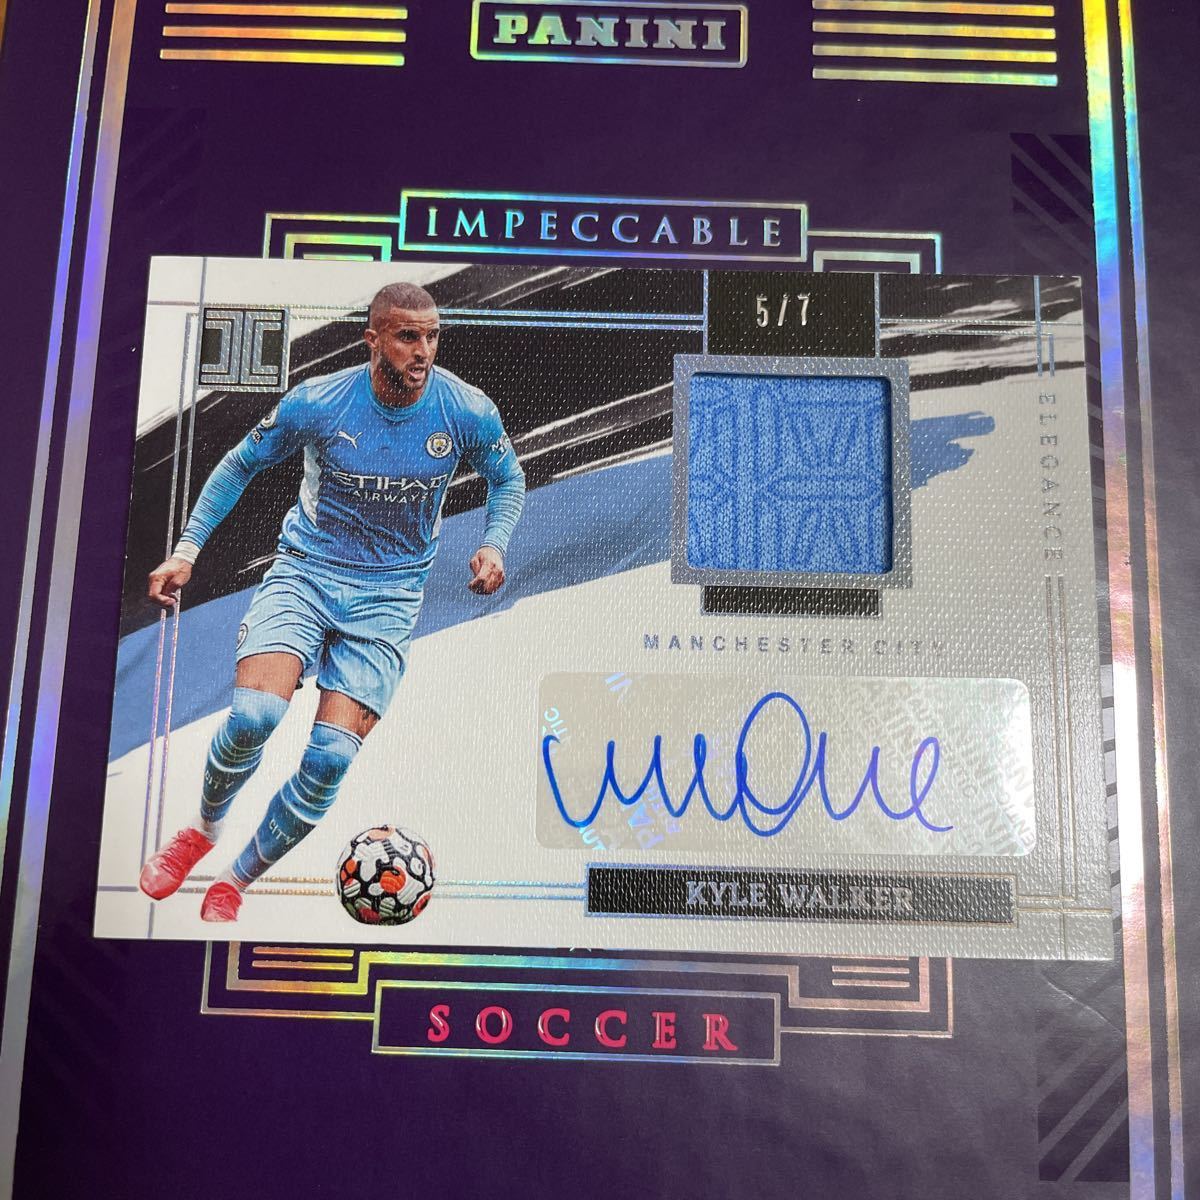 Panini impeccable soccer 2021-22 Manchester City /7 autograph Kyle Walker ウォーカー マンチェスターシティ _画像1